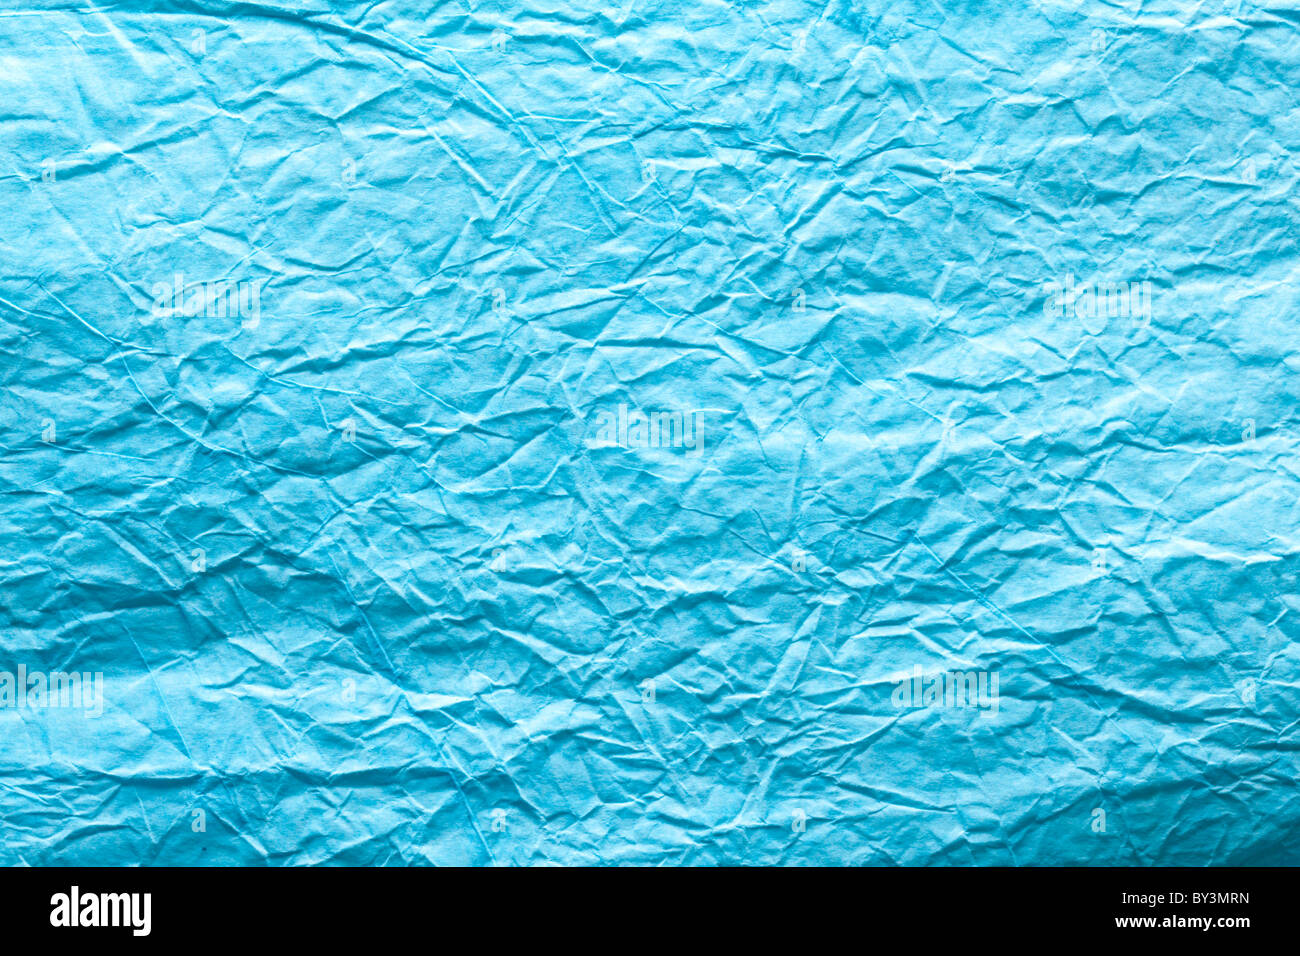 Image texture of crumpled blue paper. Stock Photo